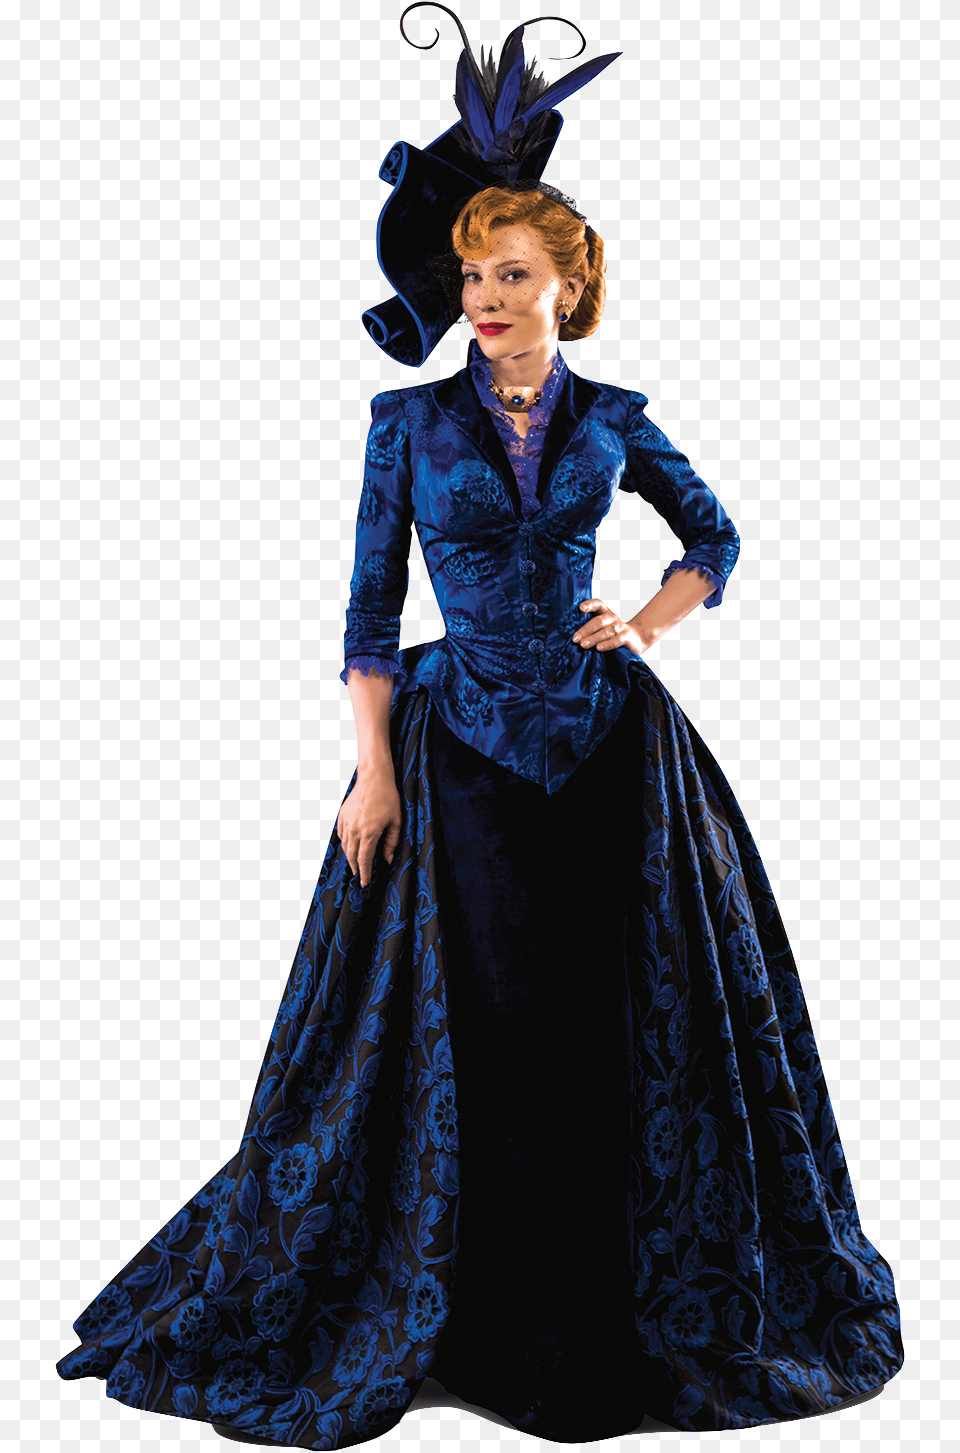 Cate Blanchett Cinderella, Formal Wear, Clothing, Costume, Dress Png